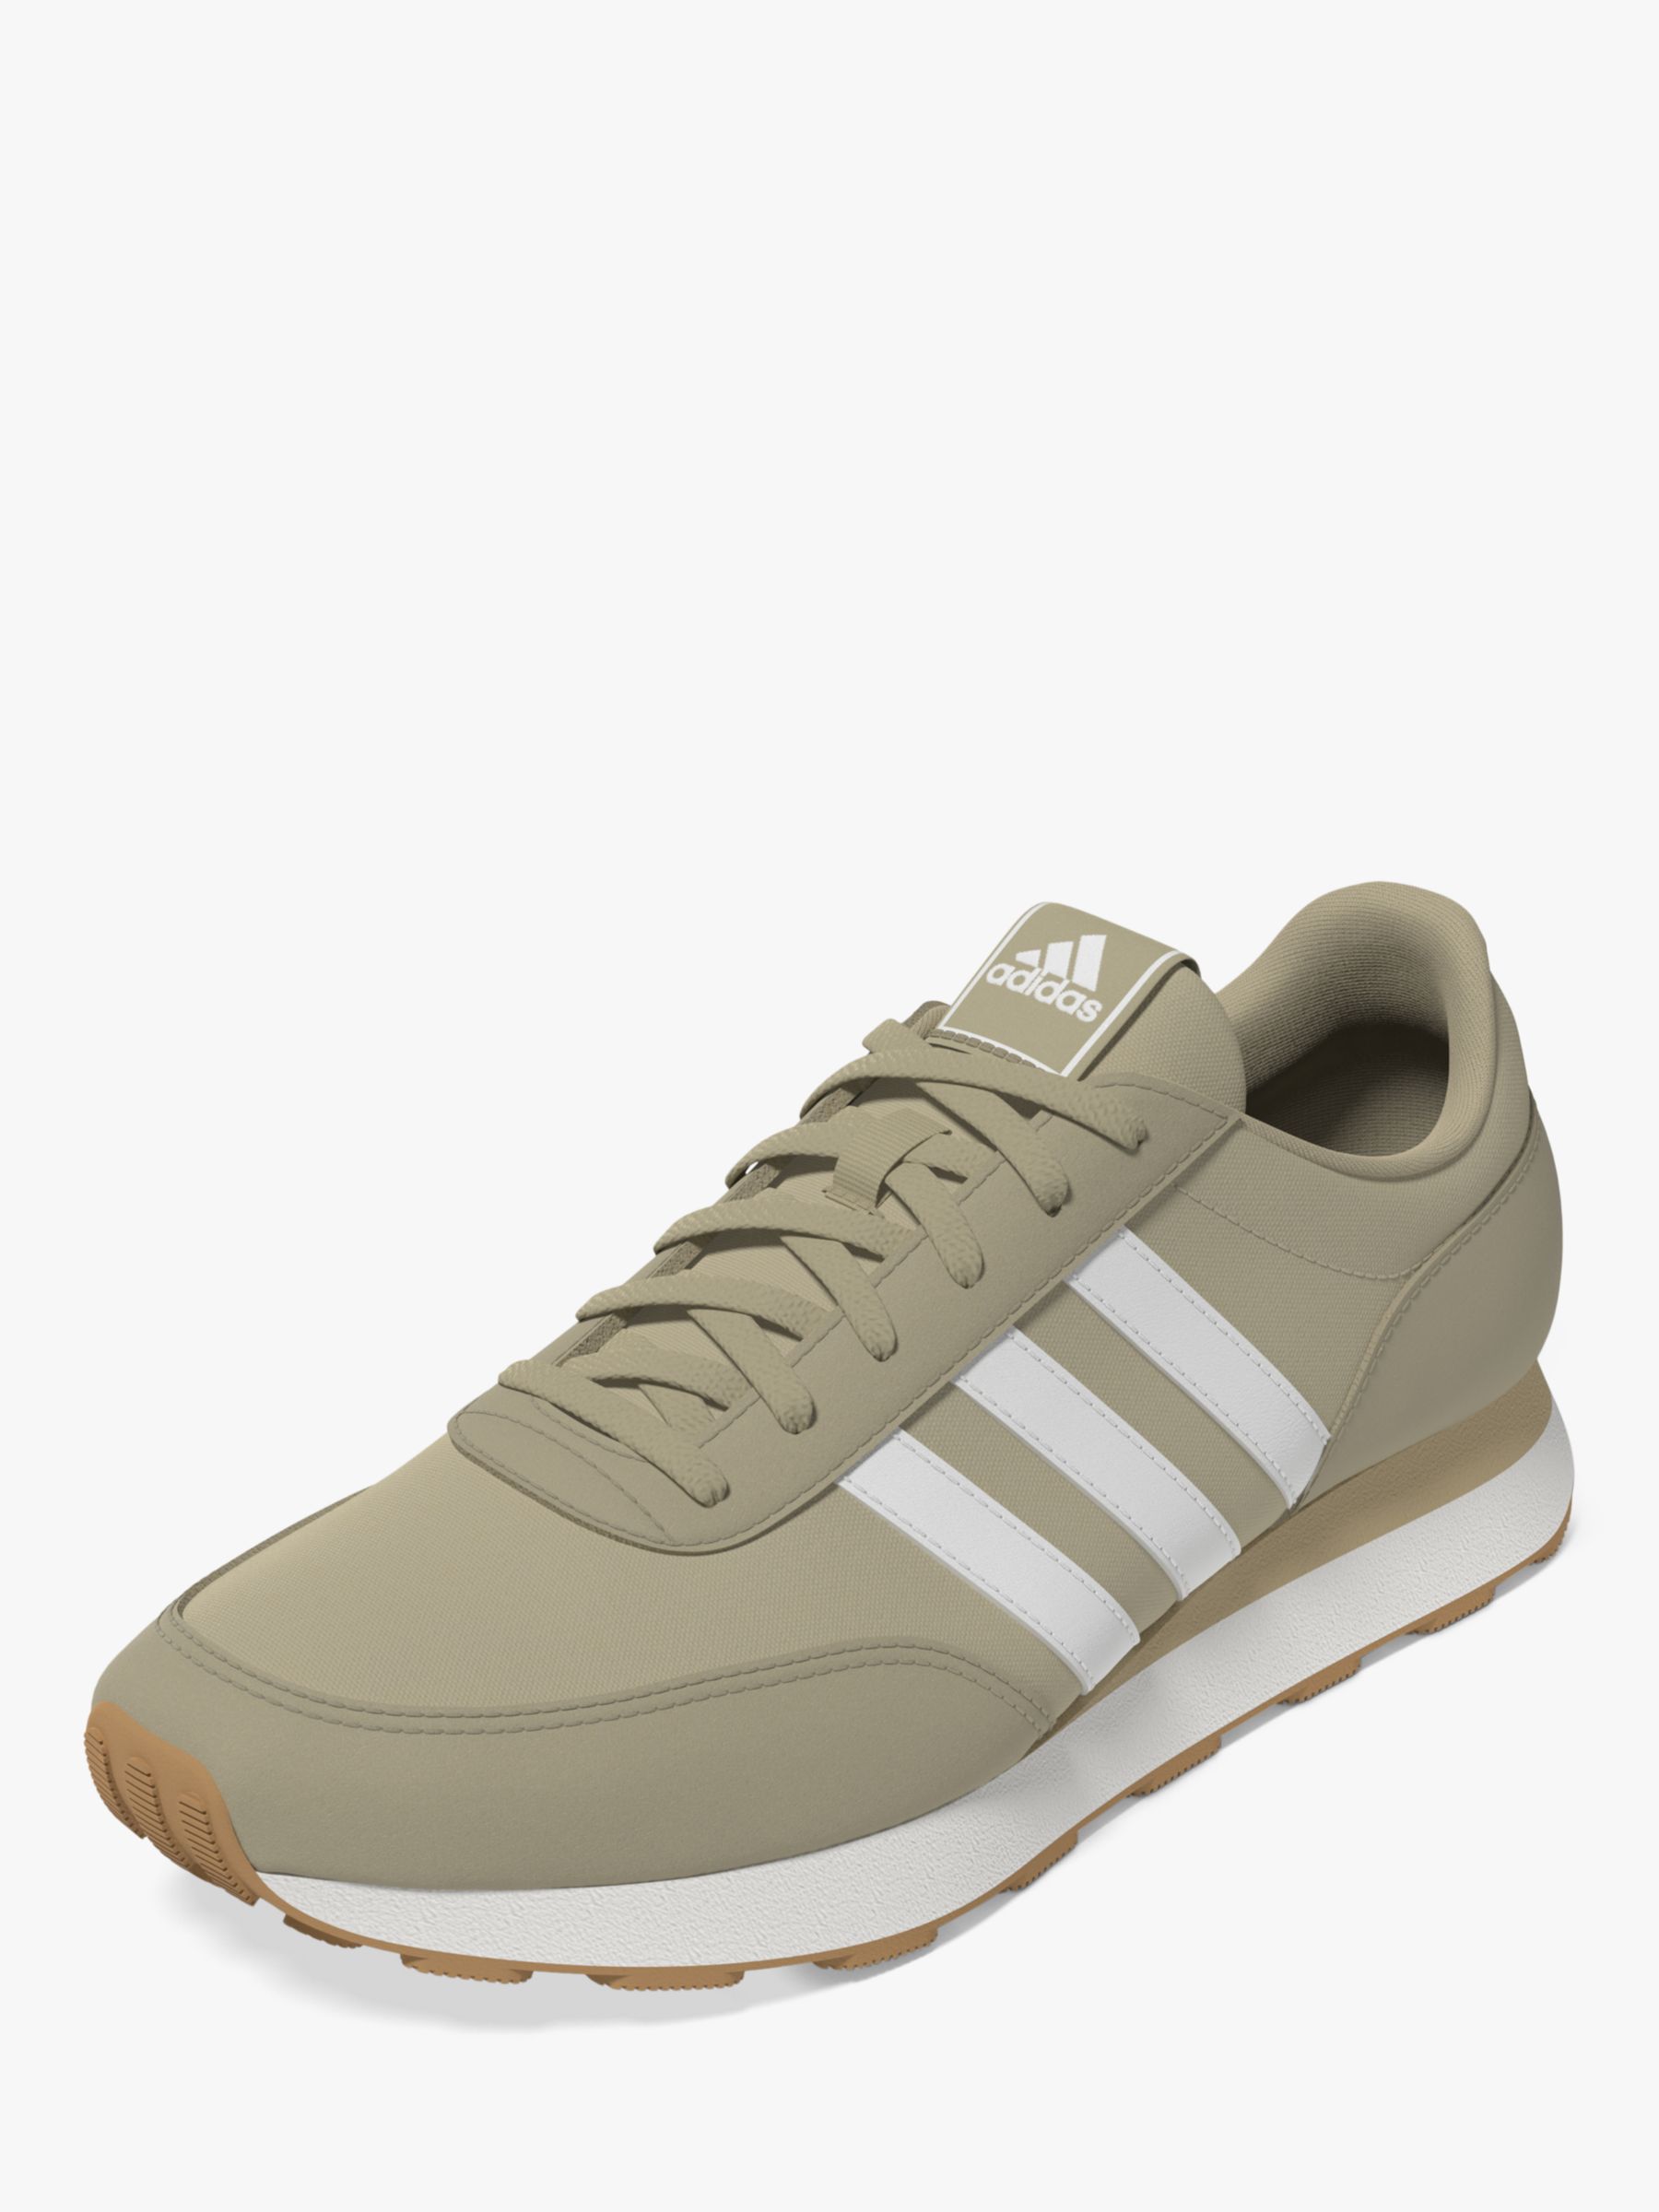 adidas Run 60s Trainers, Camel/white at John Lewis & Partners